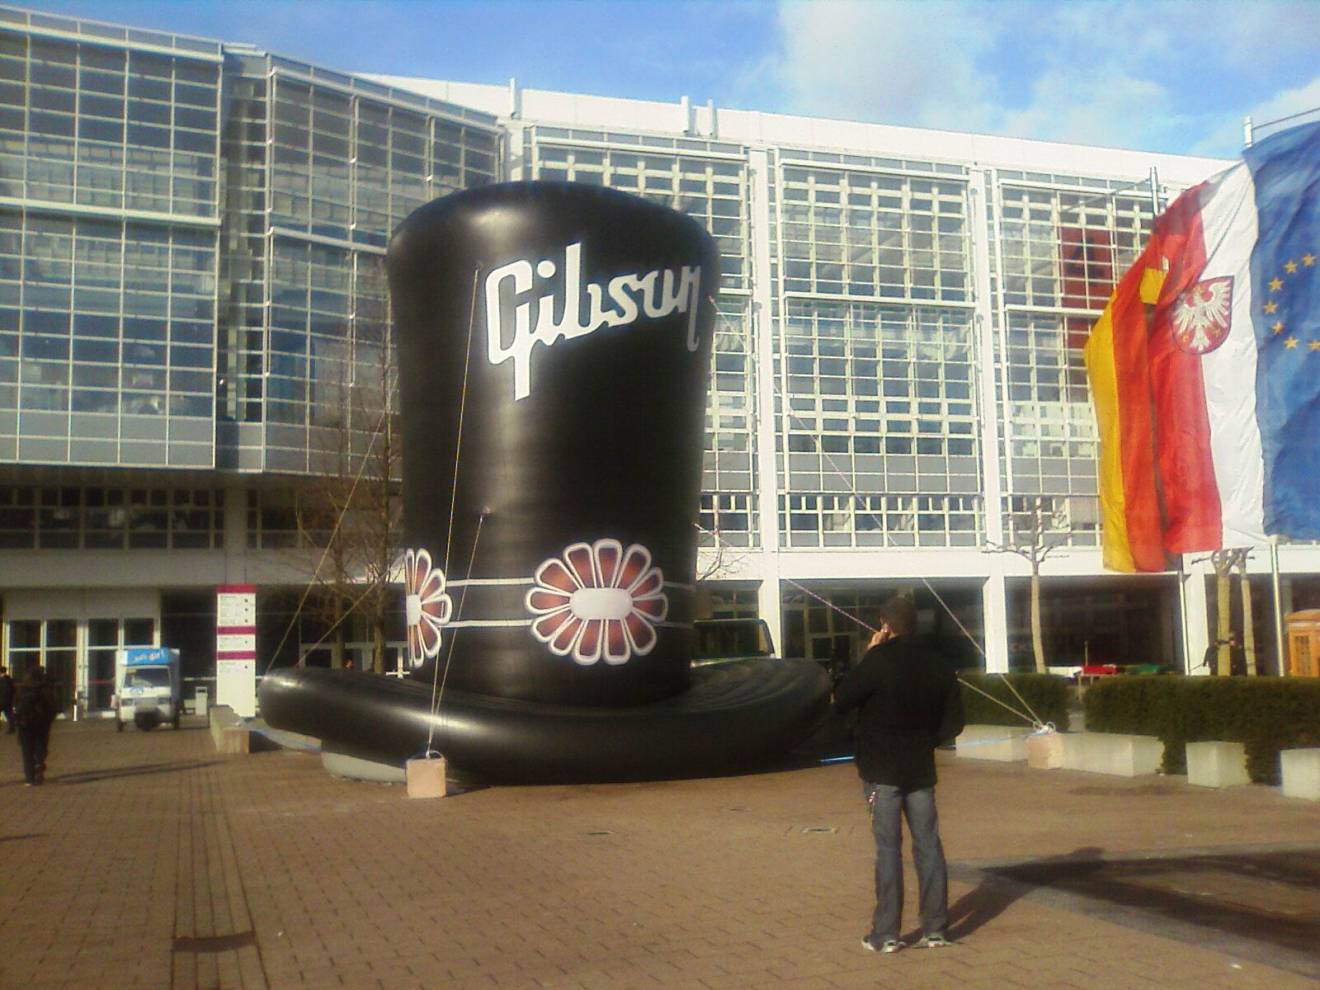 Giant inflatable product enlargements inflatable eye-catching hat of Saul Hudson the Gibson guitarist of Guns 'N Roses at the entrance of the largest Music show in Frankfurt X-Treme Creations